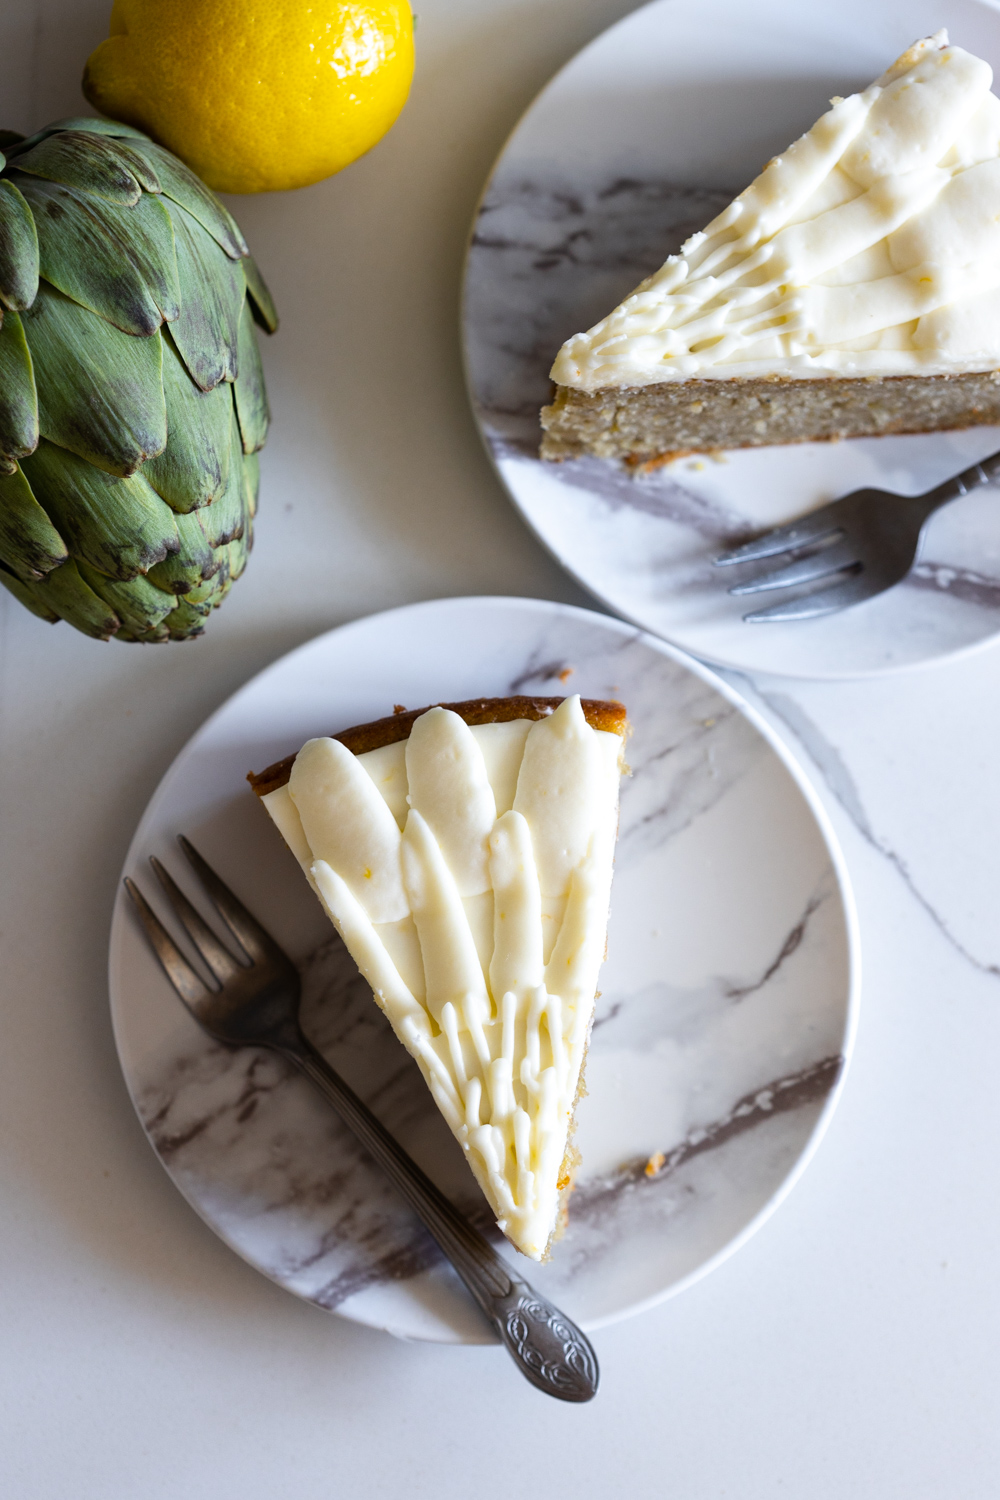 Slices of Artichoke Olive Oil Cake with Lemon Cream Cheese Frosting